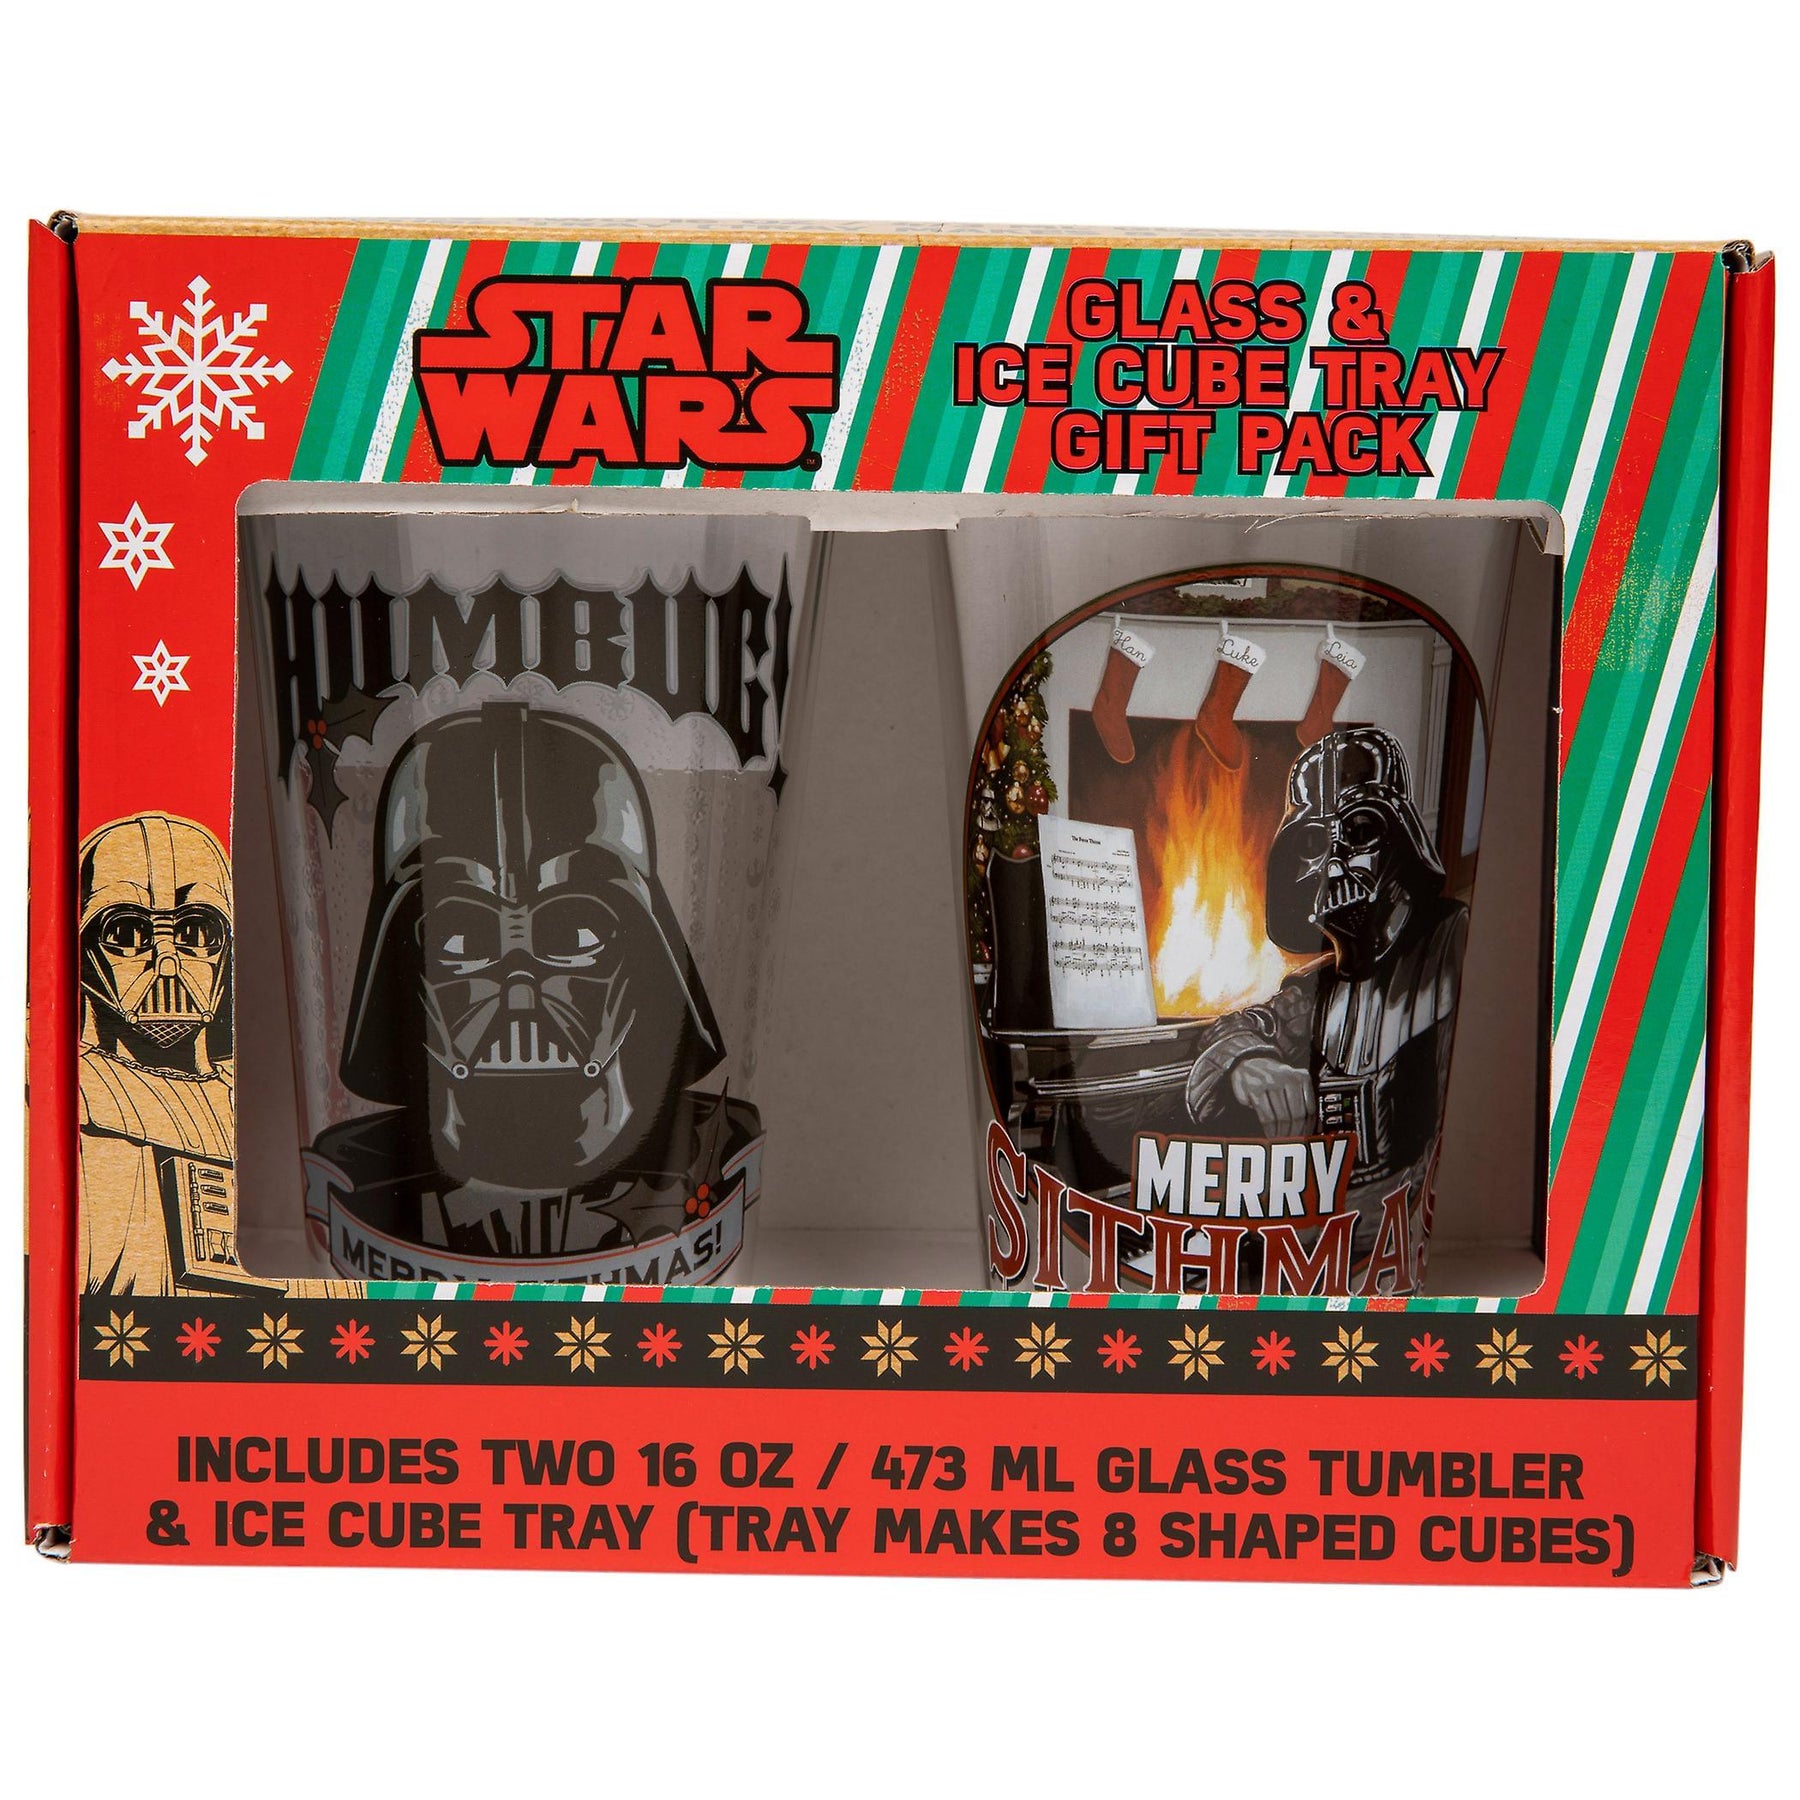 Star Wars Darth Vader Holiday Pint Glass Gift Set With Ice Cube Tray